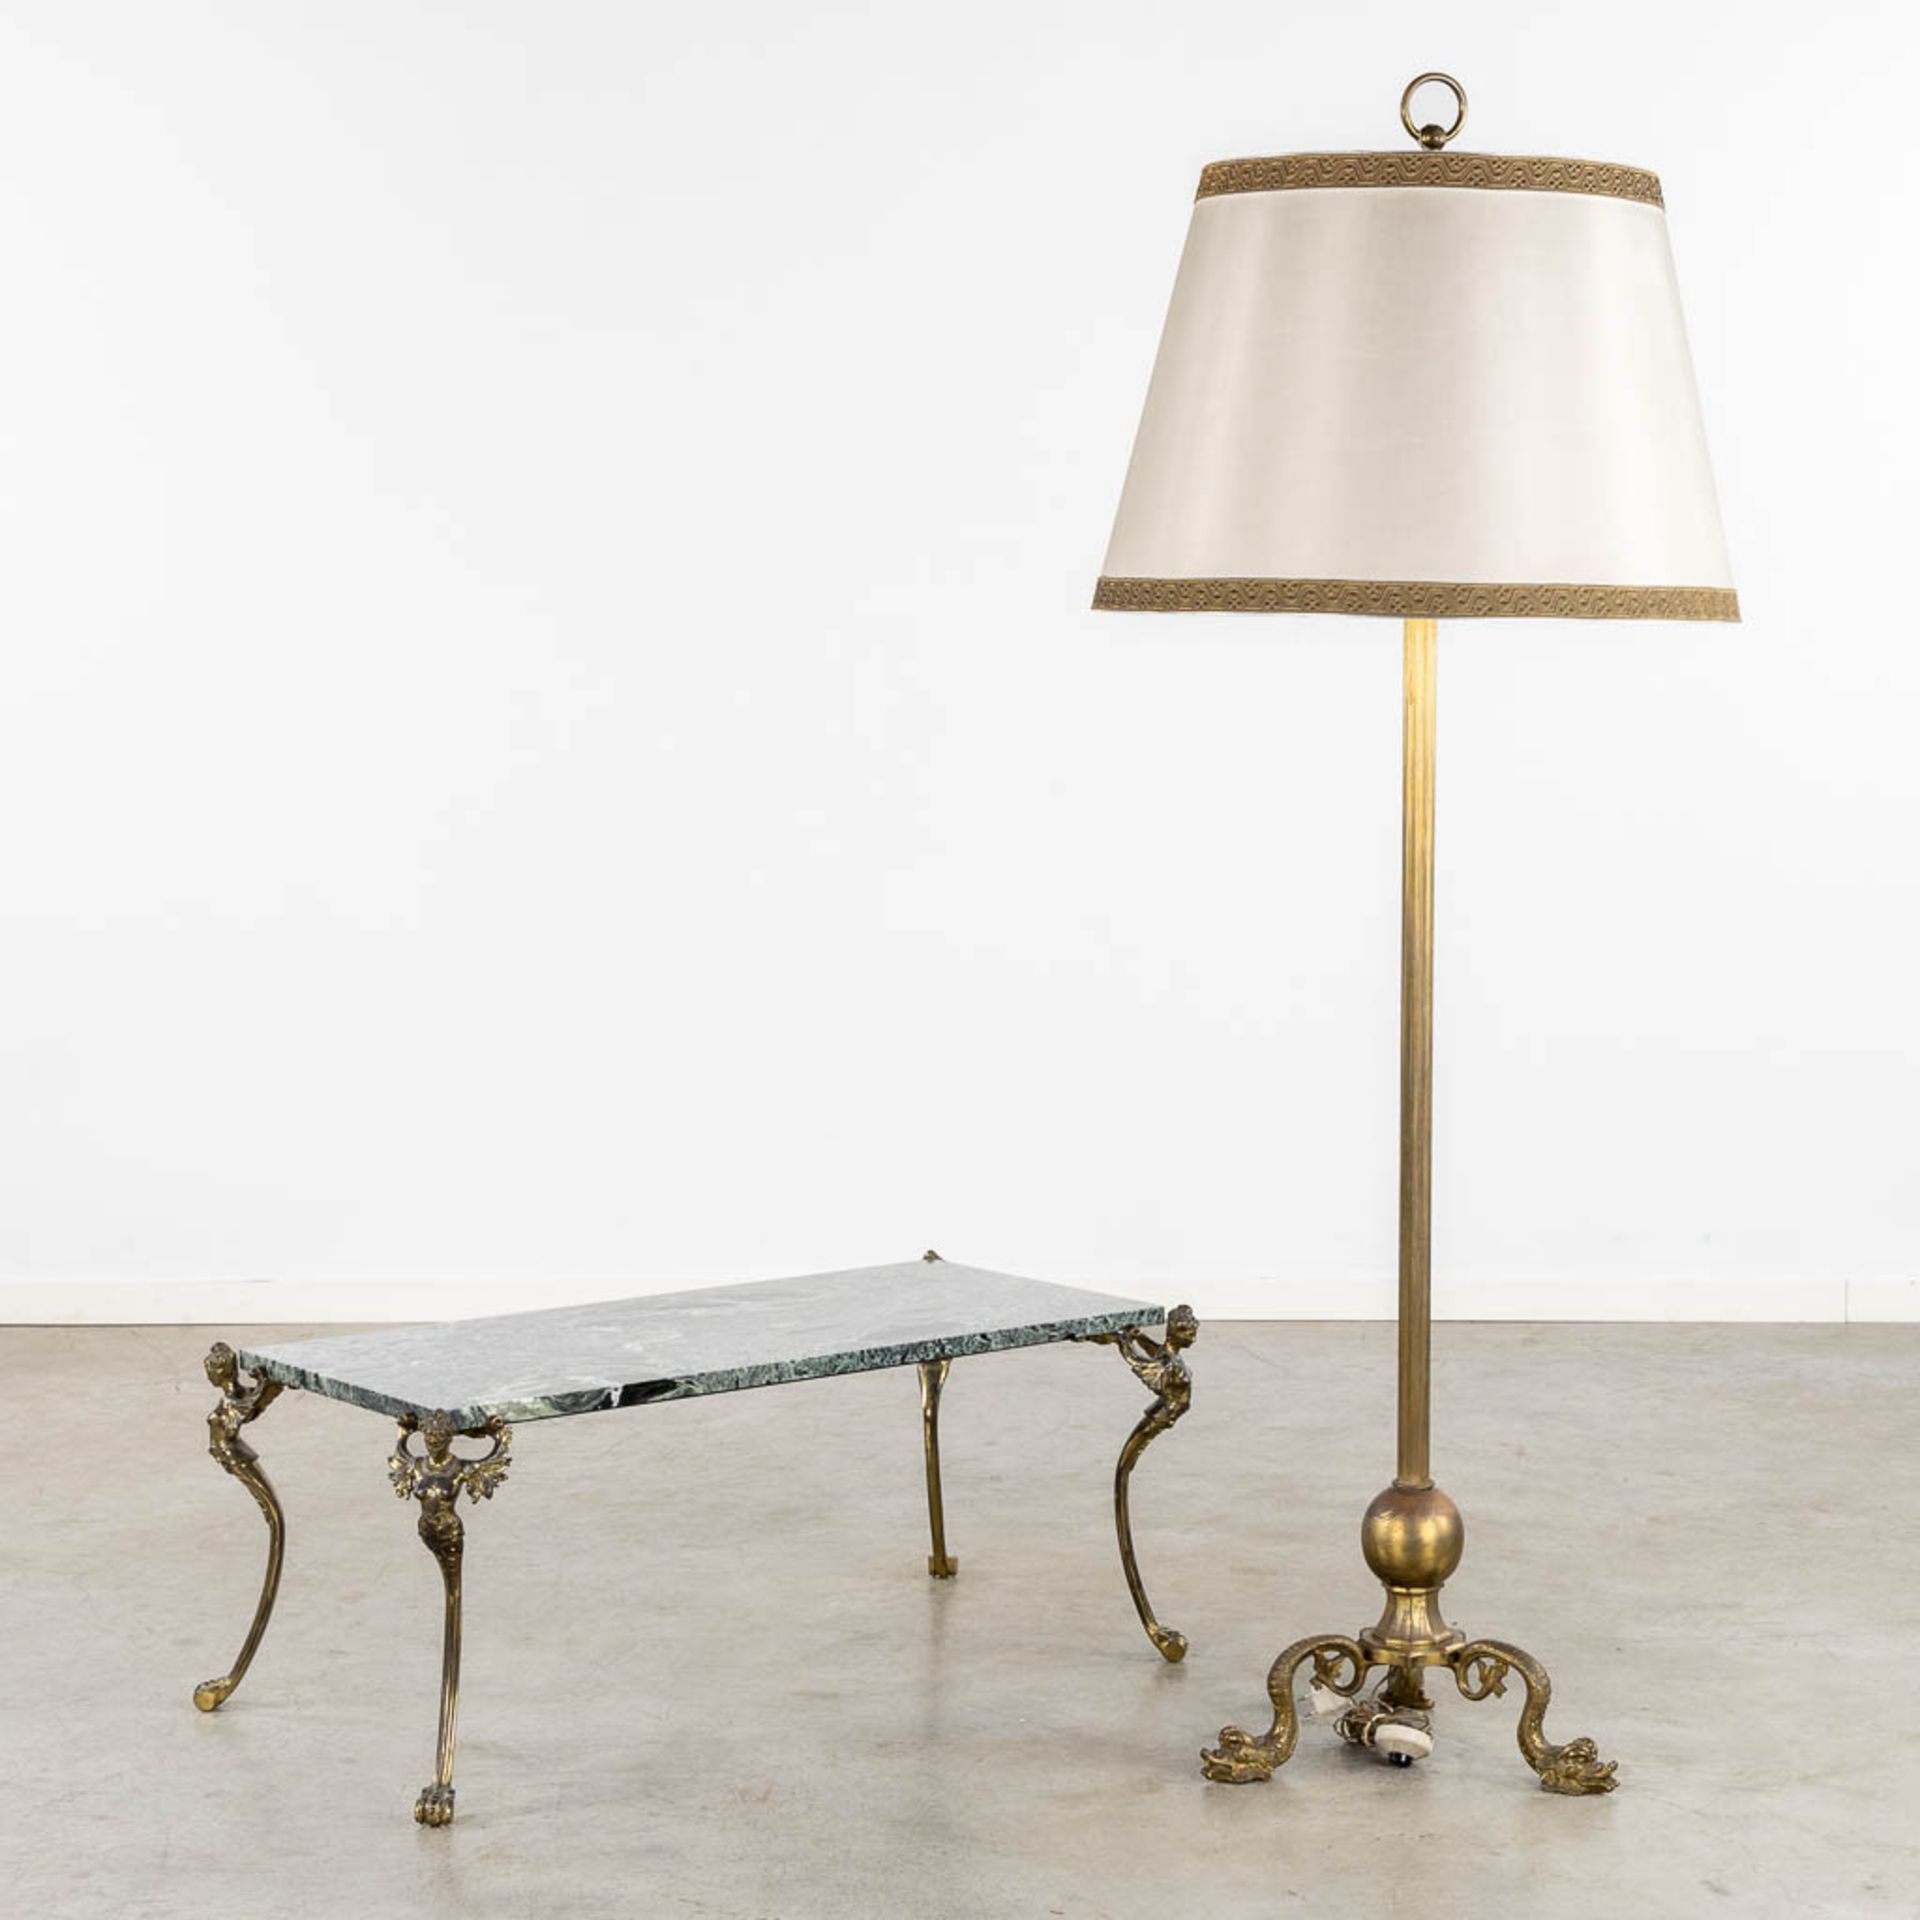 A marble and bronze coffee table, added a floorlamp. Circa 1960. (L:52 x W:101 x H:41 cm)